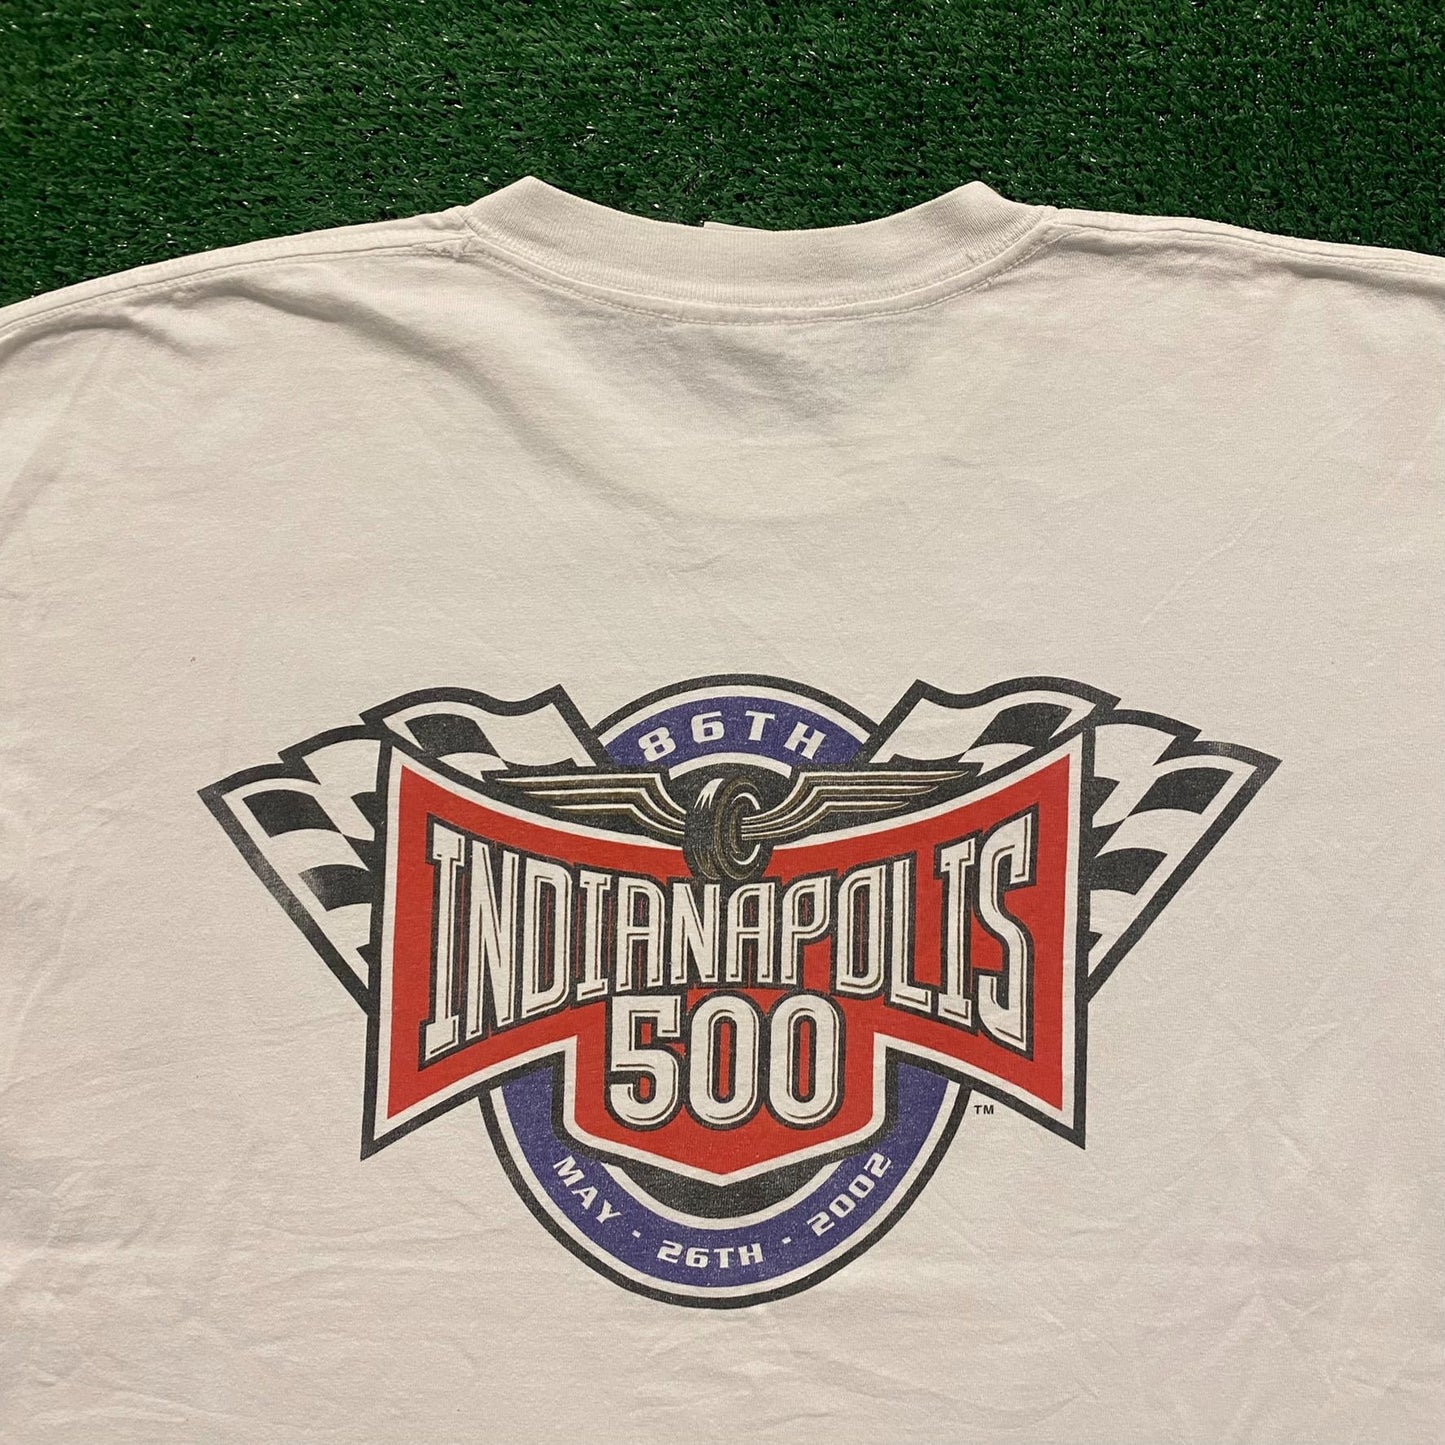 Indianapolis 500 Vintage Indy Racing T-Shirt